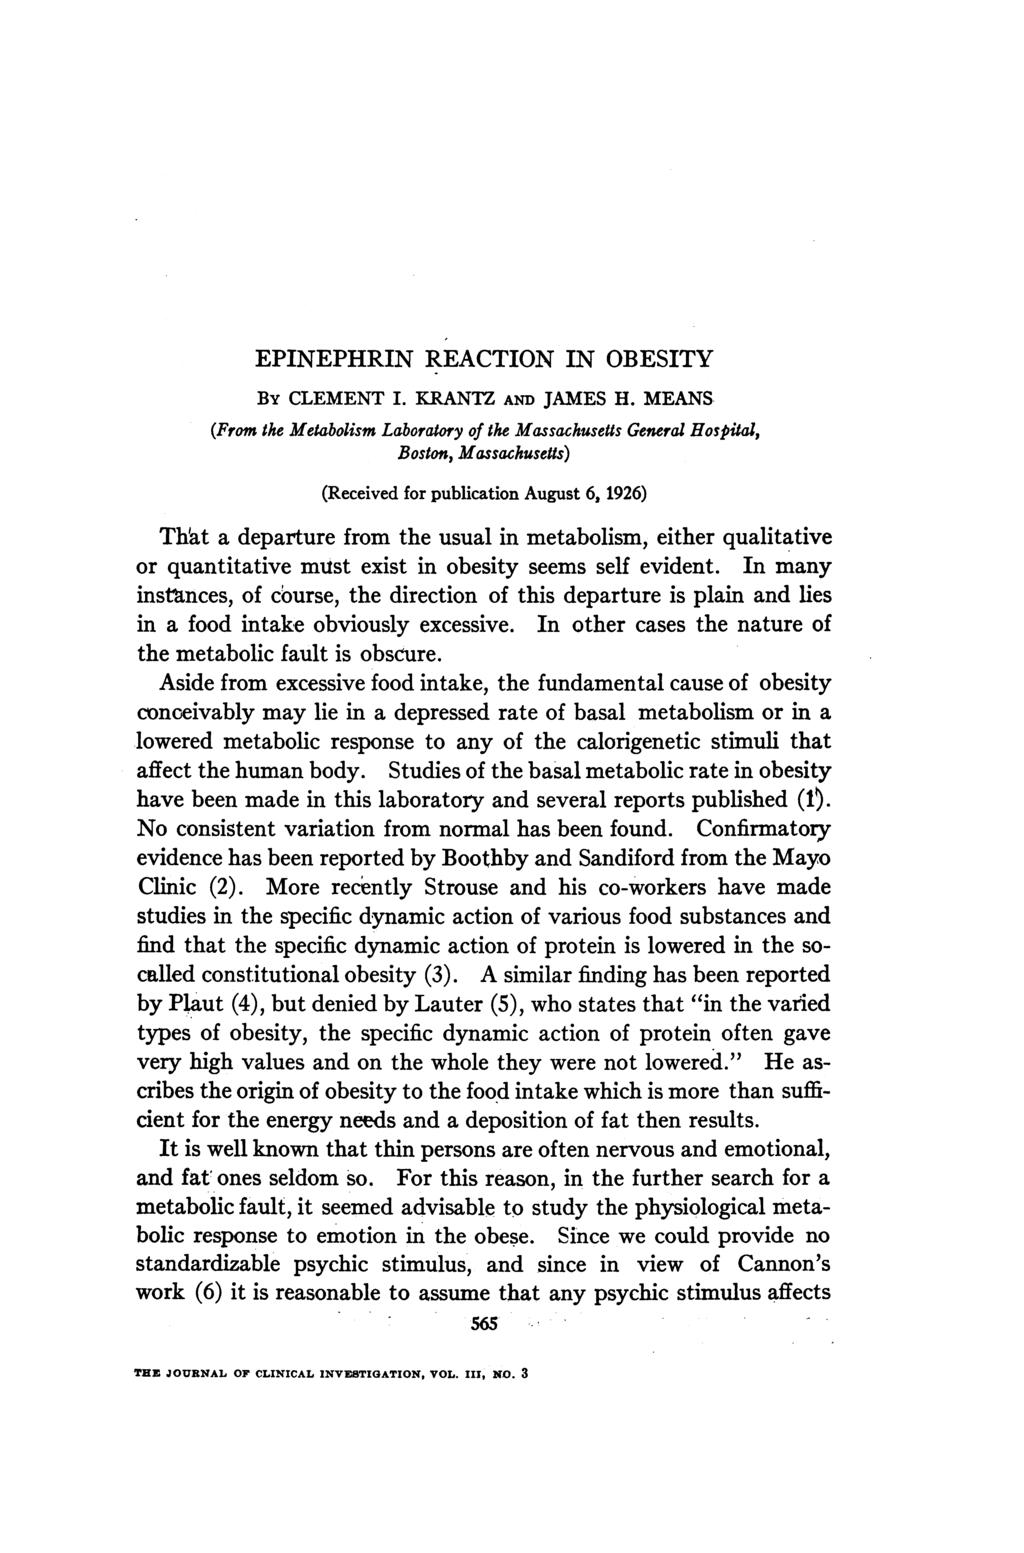 EPINEPHRIN REACTION IN OBESITY BY CLEMENT I. KRANTZ AND JAMES H.